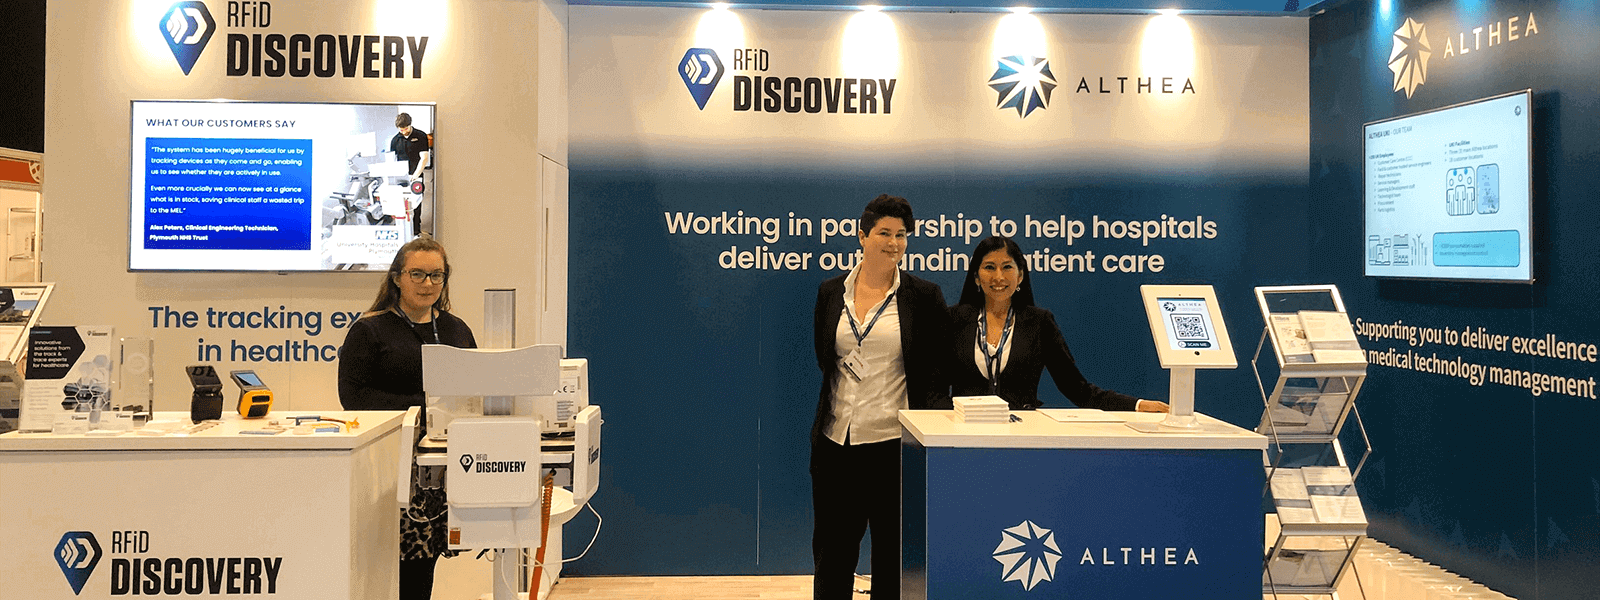 RFiD Discovery and Althea at EBME 